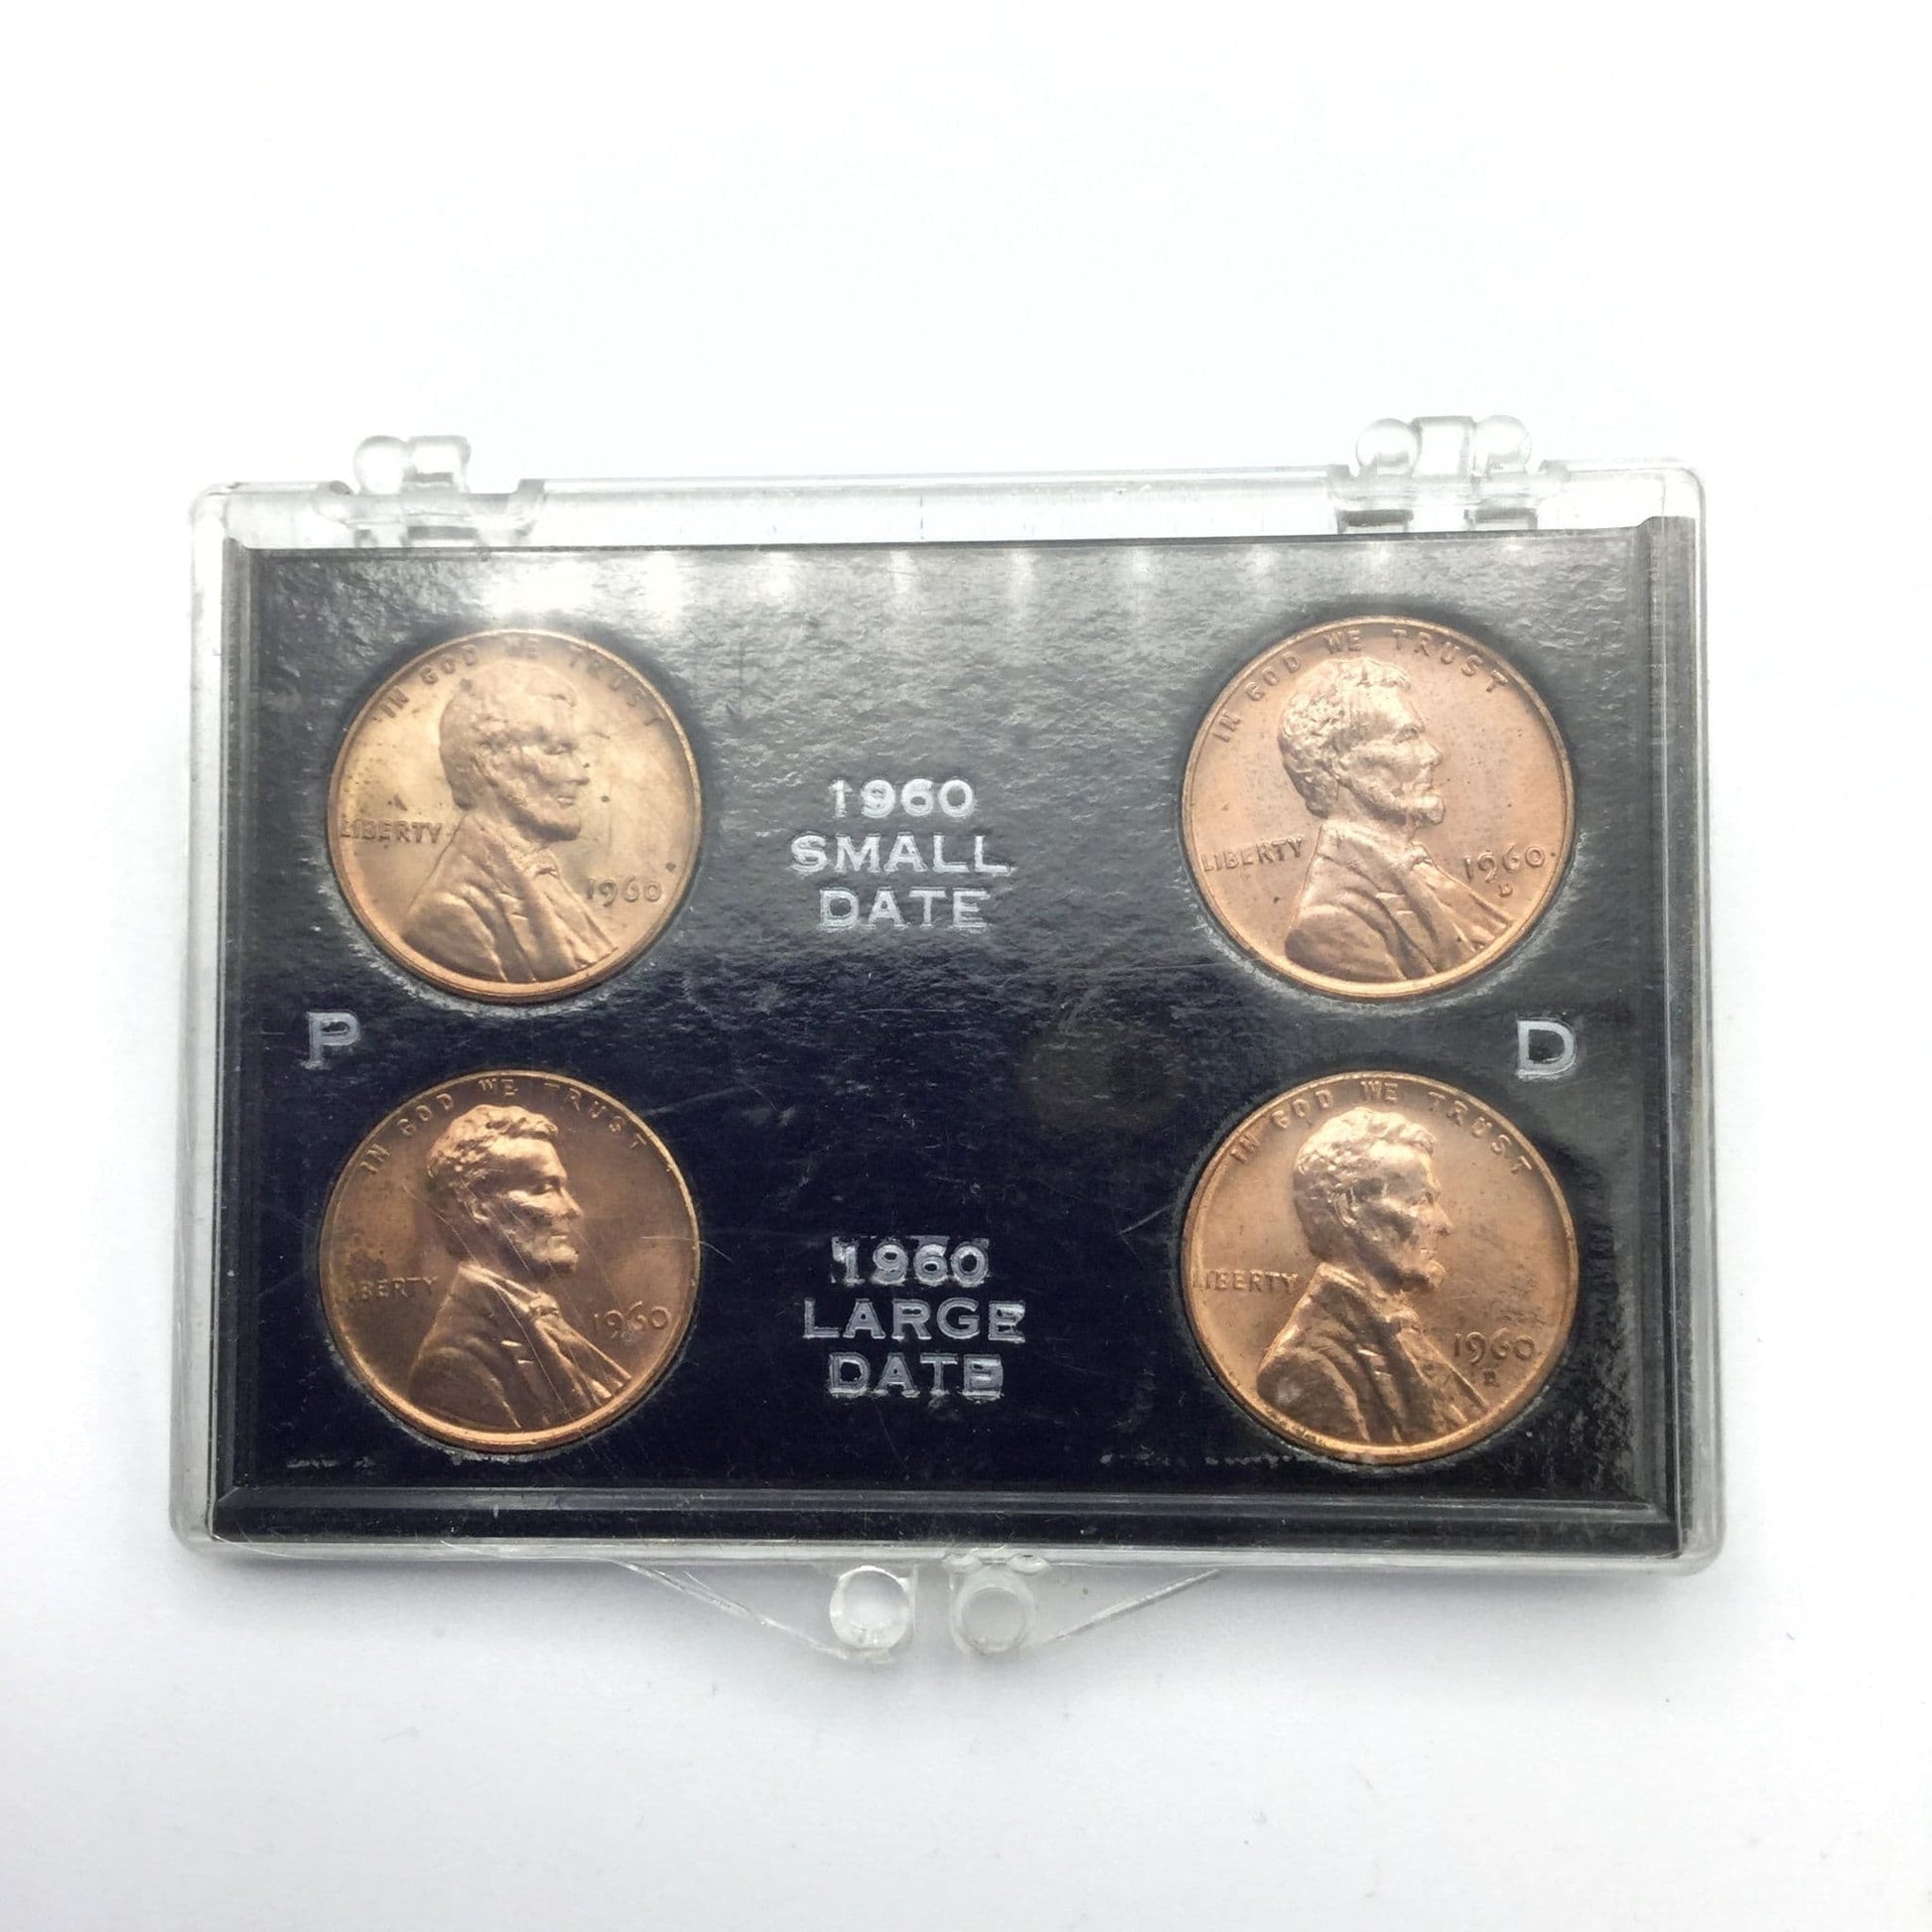 Four Lincoln Memorial Cents in a black holder and perspex case. It has P and D on the blakc holder and 1960 small date and 1960 large date on the black holder.